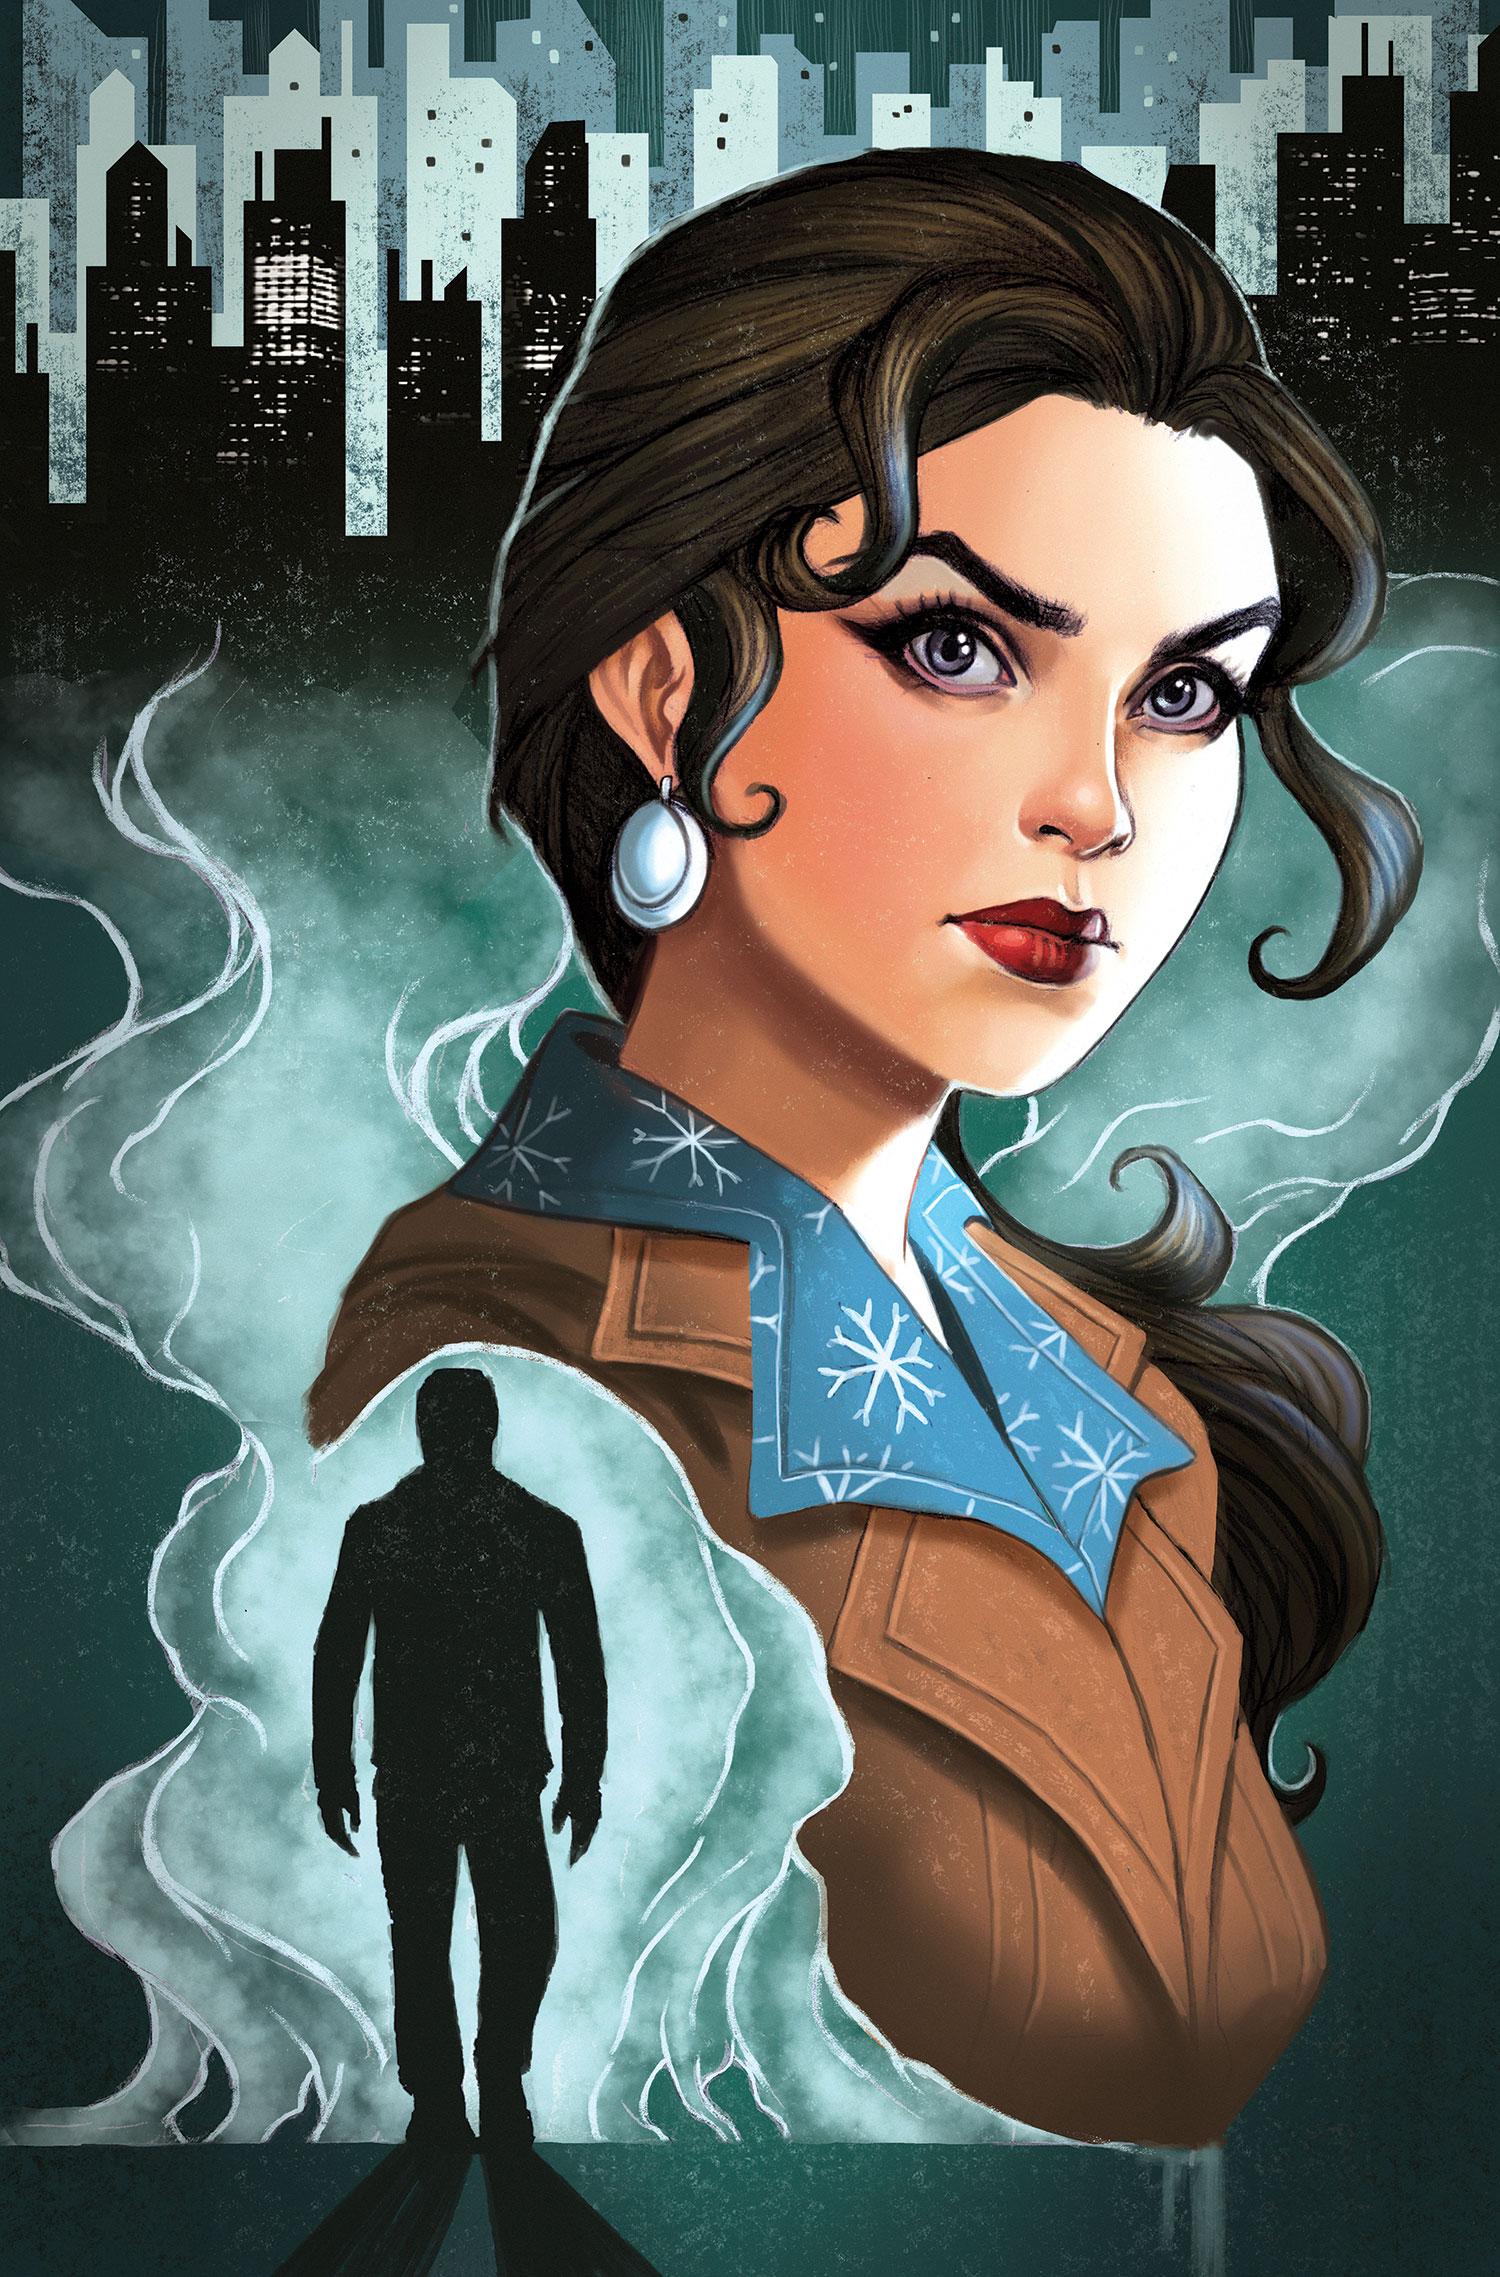 Fables: The Wolf Among Us Vol. 1 #5